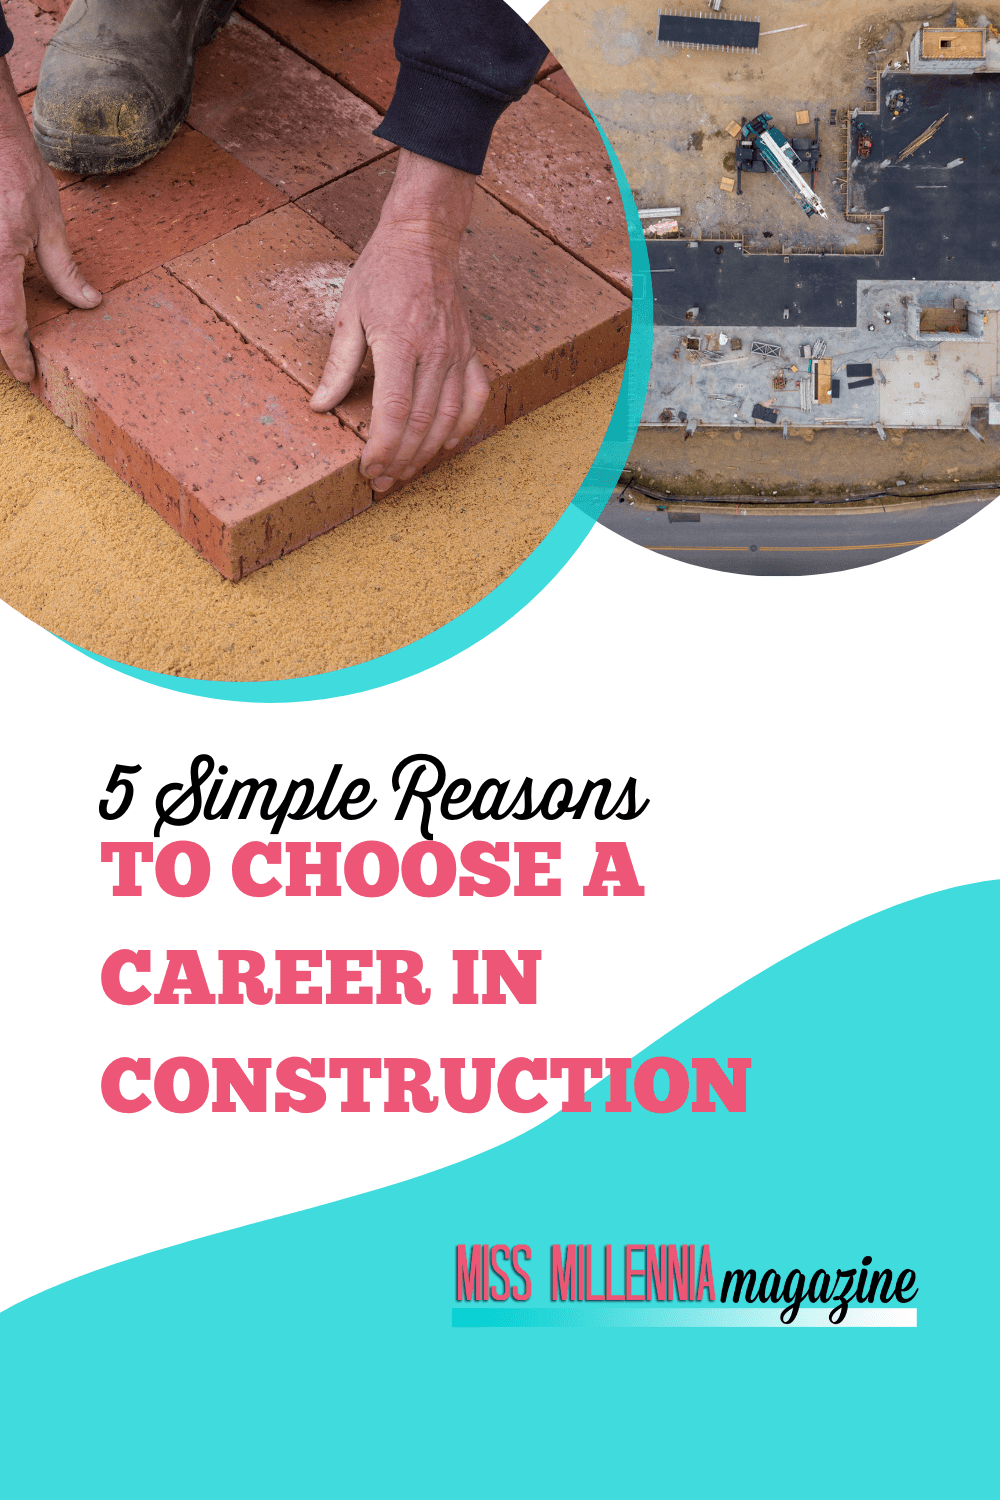 5 Simple Reasons to Choose a Career in Construction